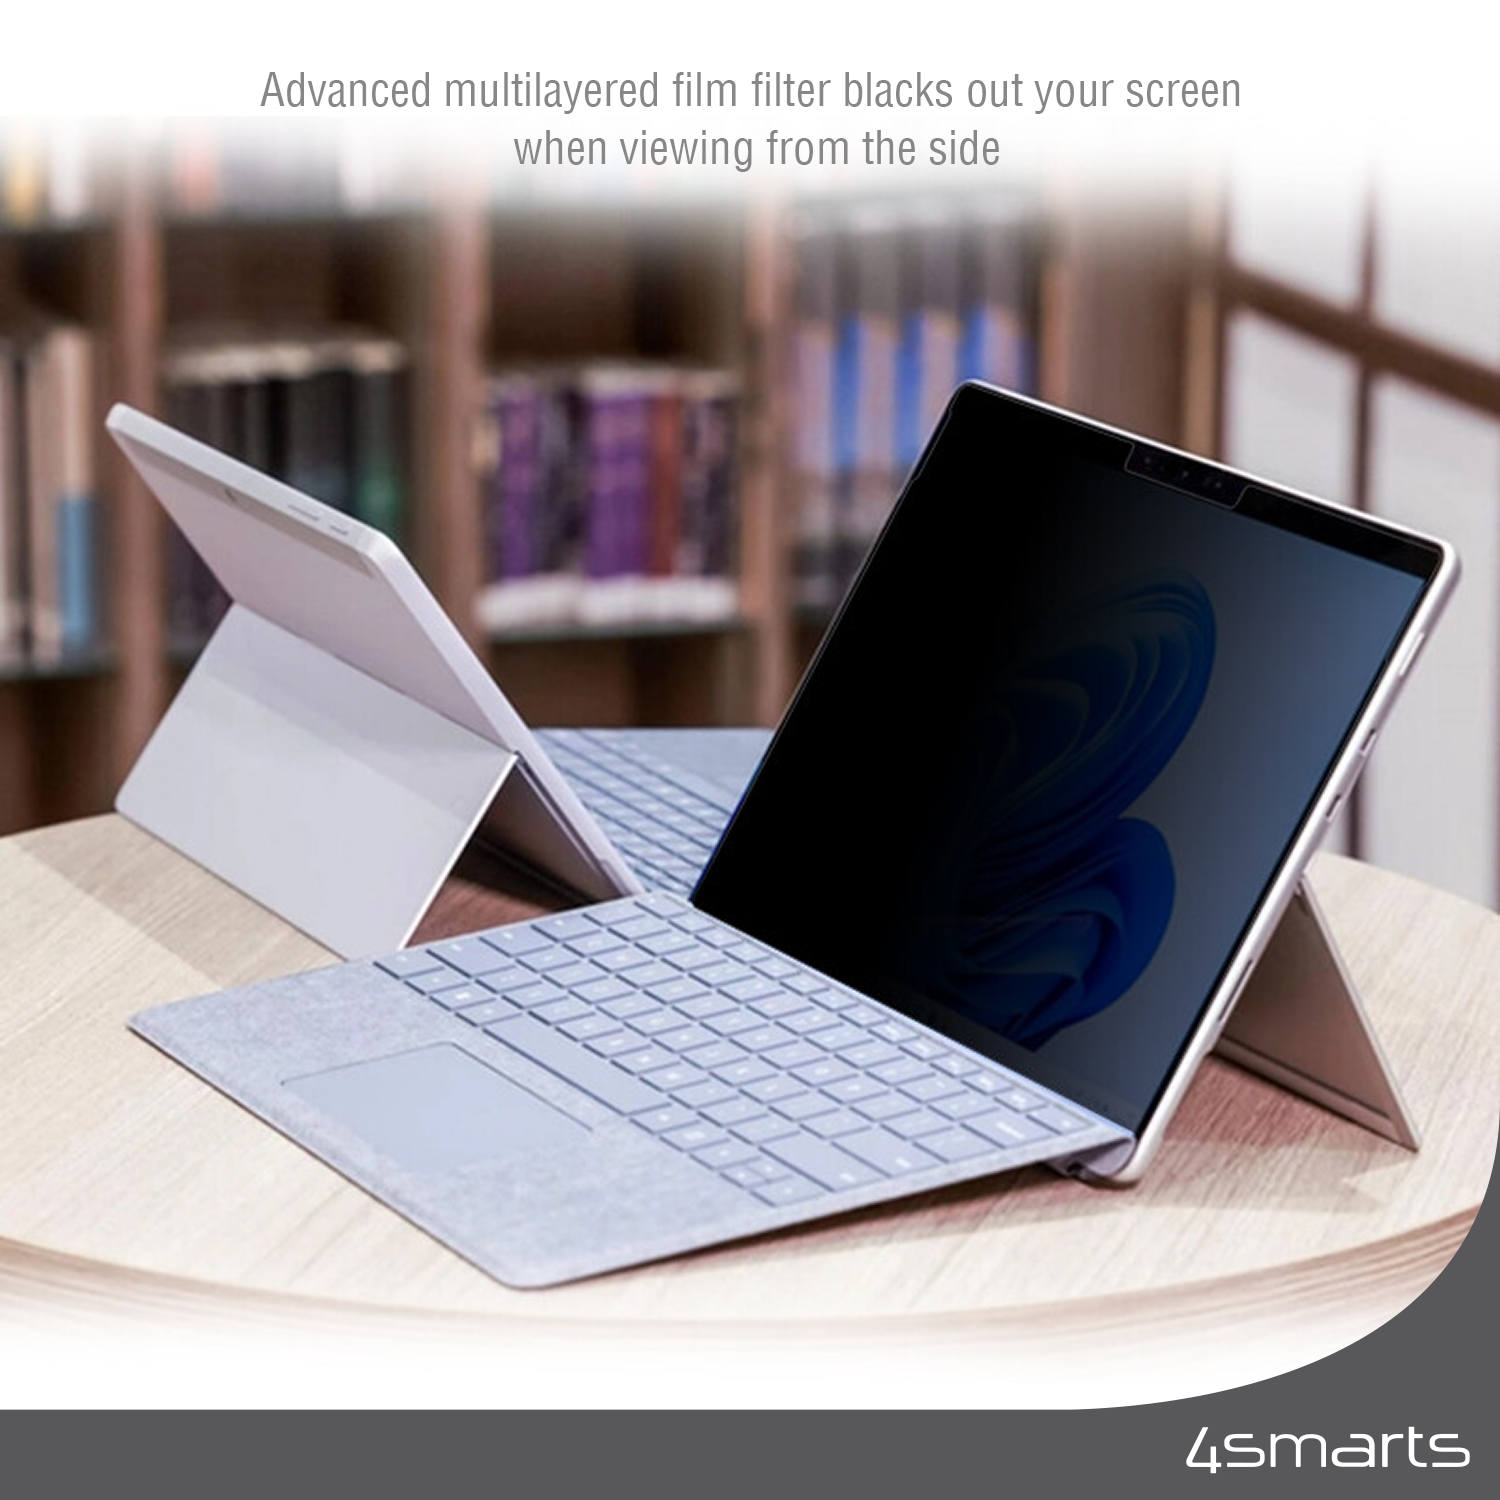 With our 4smarts Smartprotect privacy screen protector only you see what’s on your tablet screen. 